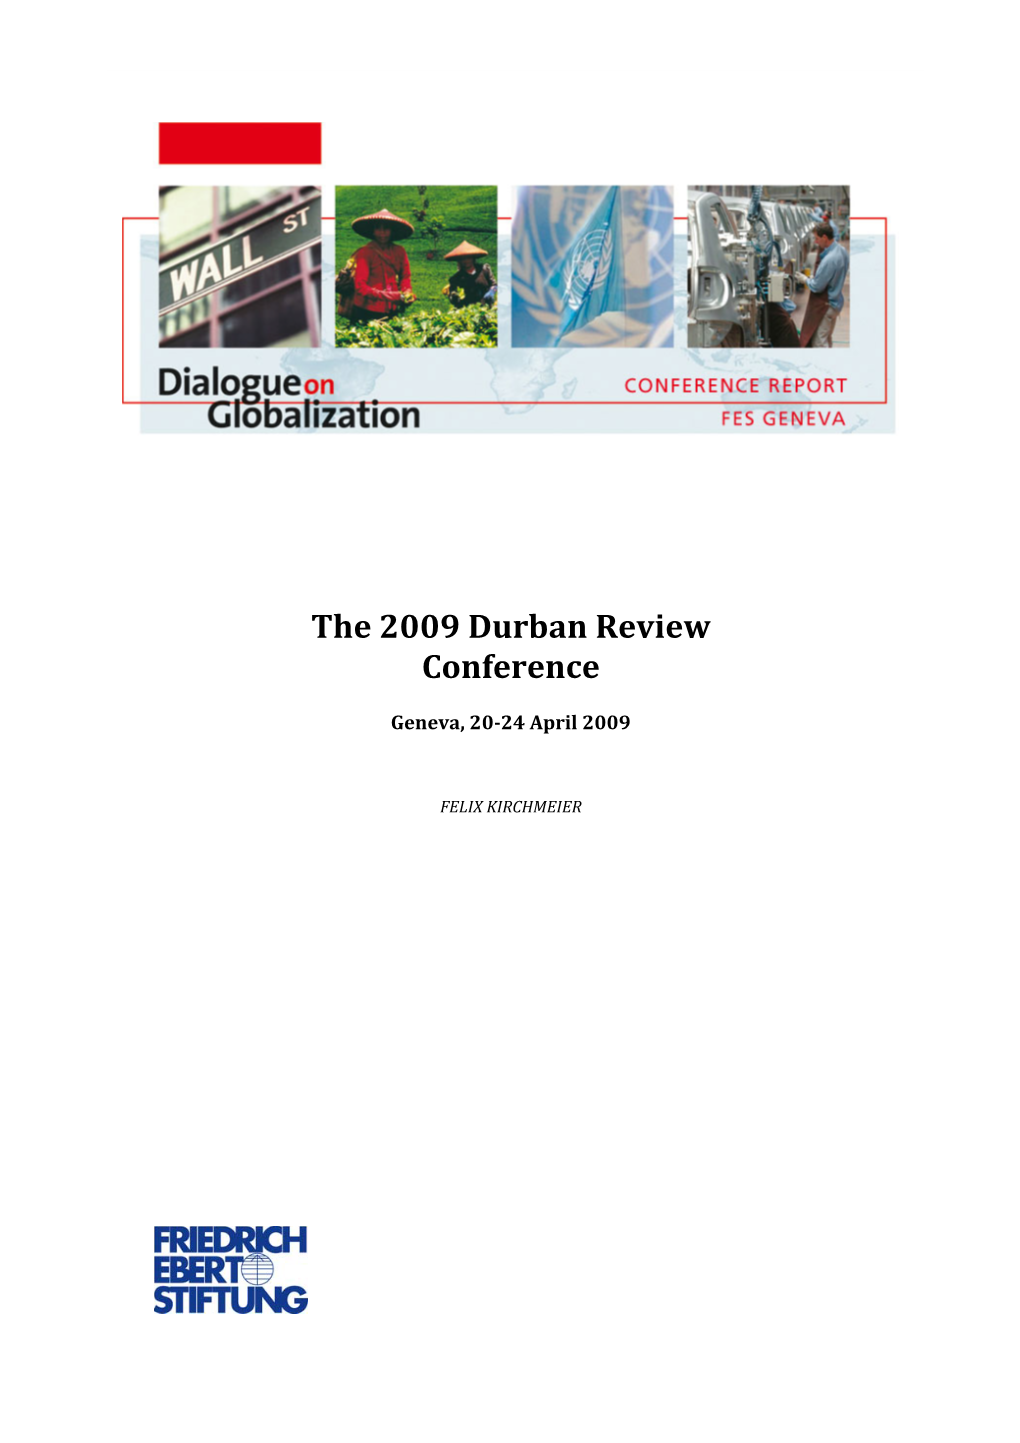 The 2009 Durban Review Conference